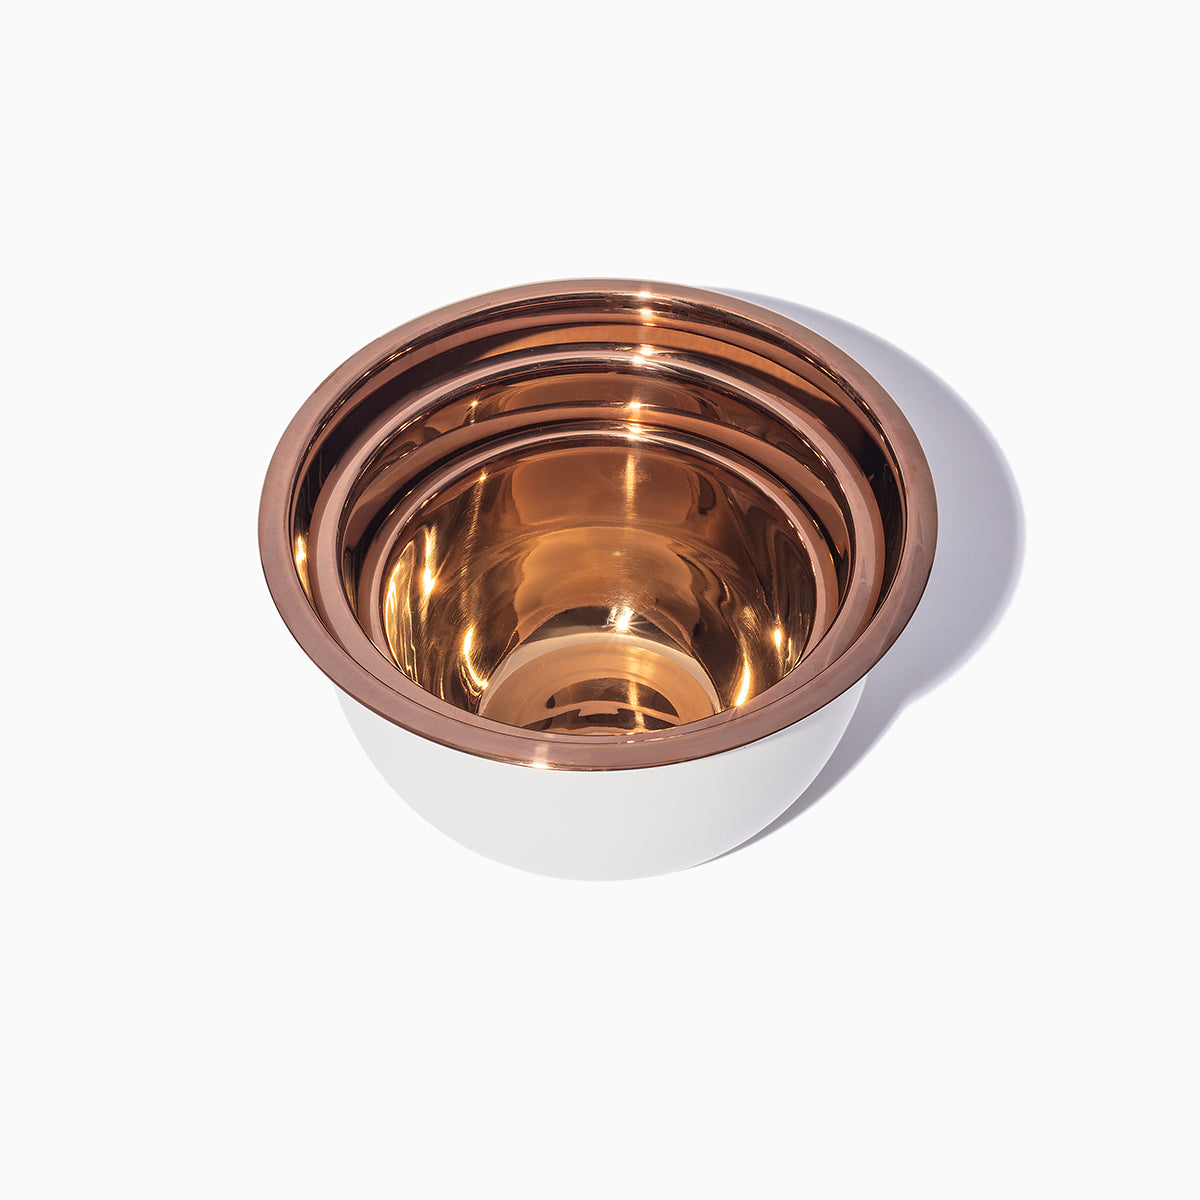 Mixing Bowls (Set of 3) | Product Detail Image | Uncommon James Home